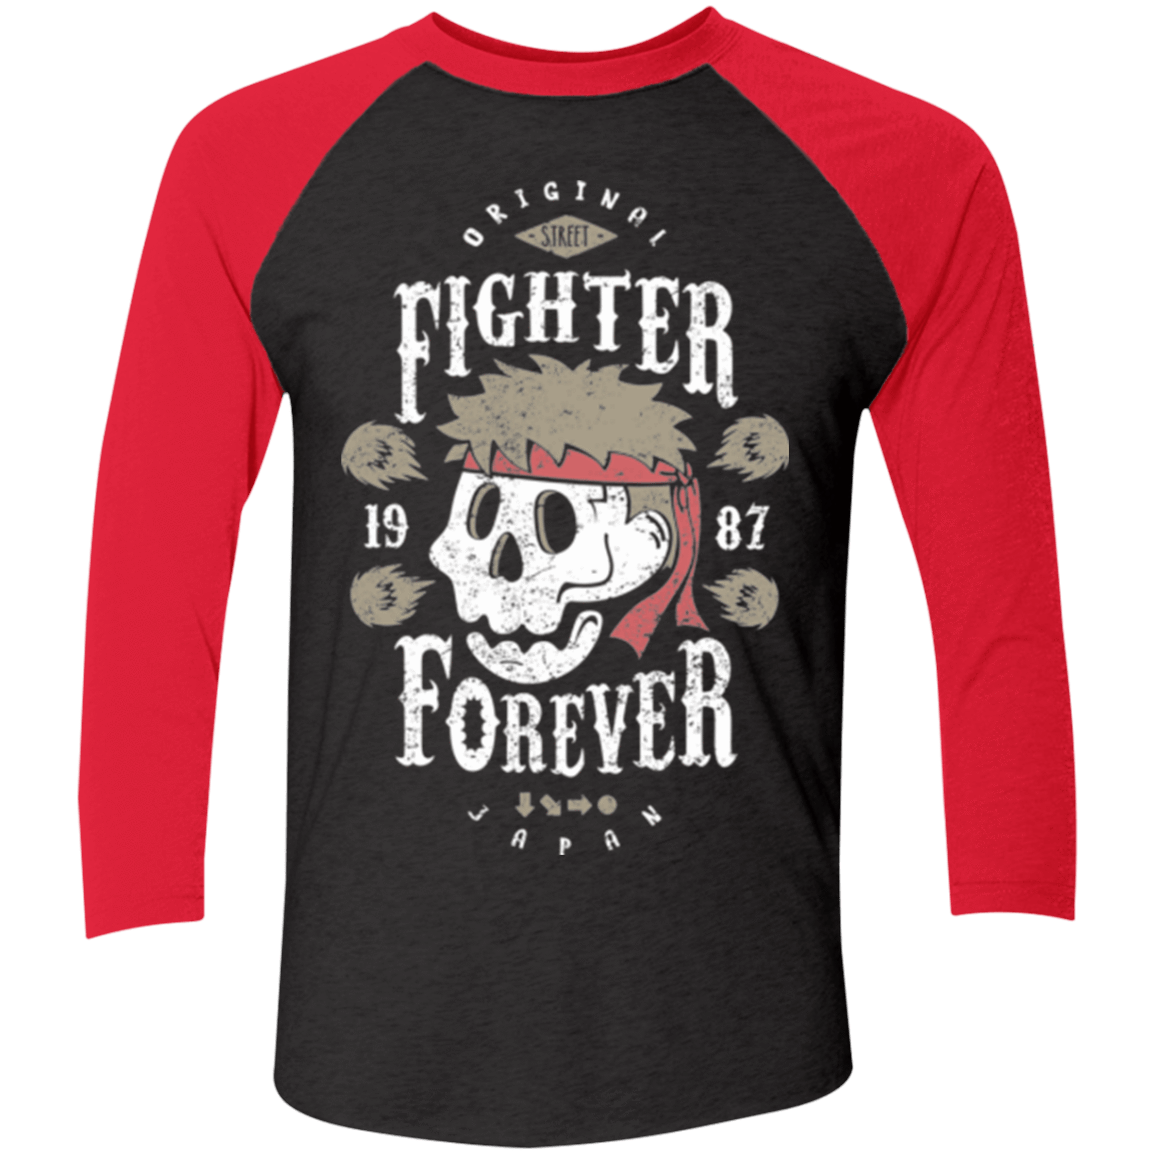 T-Shirts Vintage Black/Vintage Red / X-Small Fighter Forever Ryu Men's Triblend 3/4 Sleeve